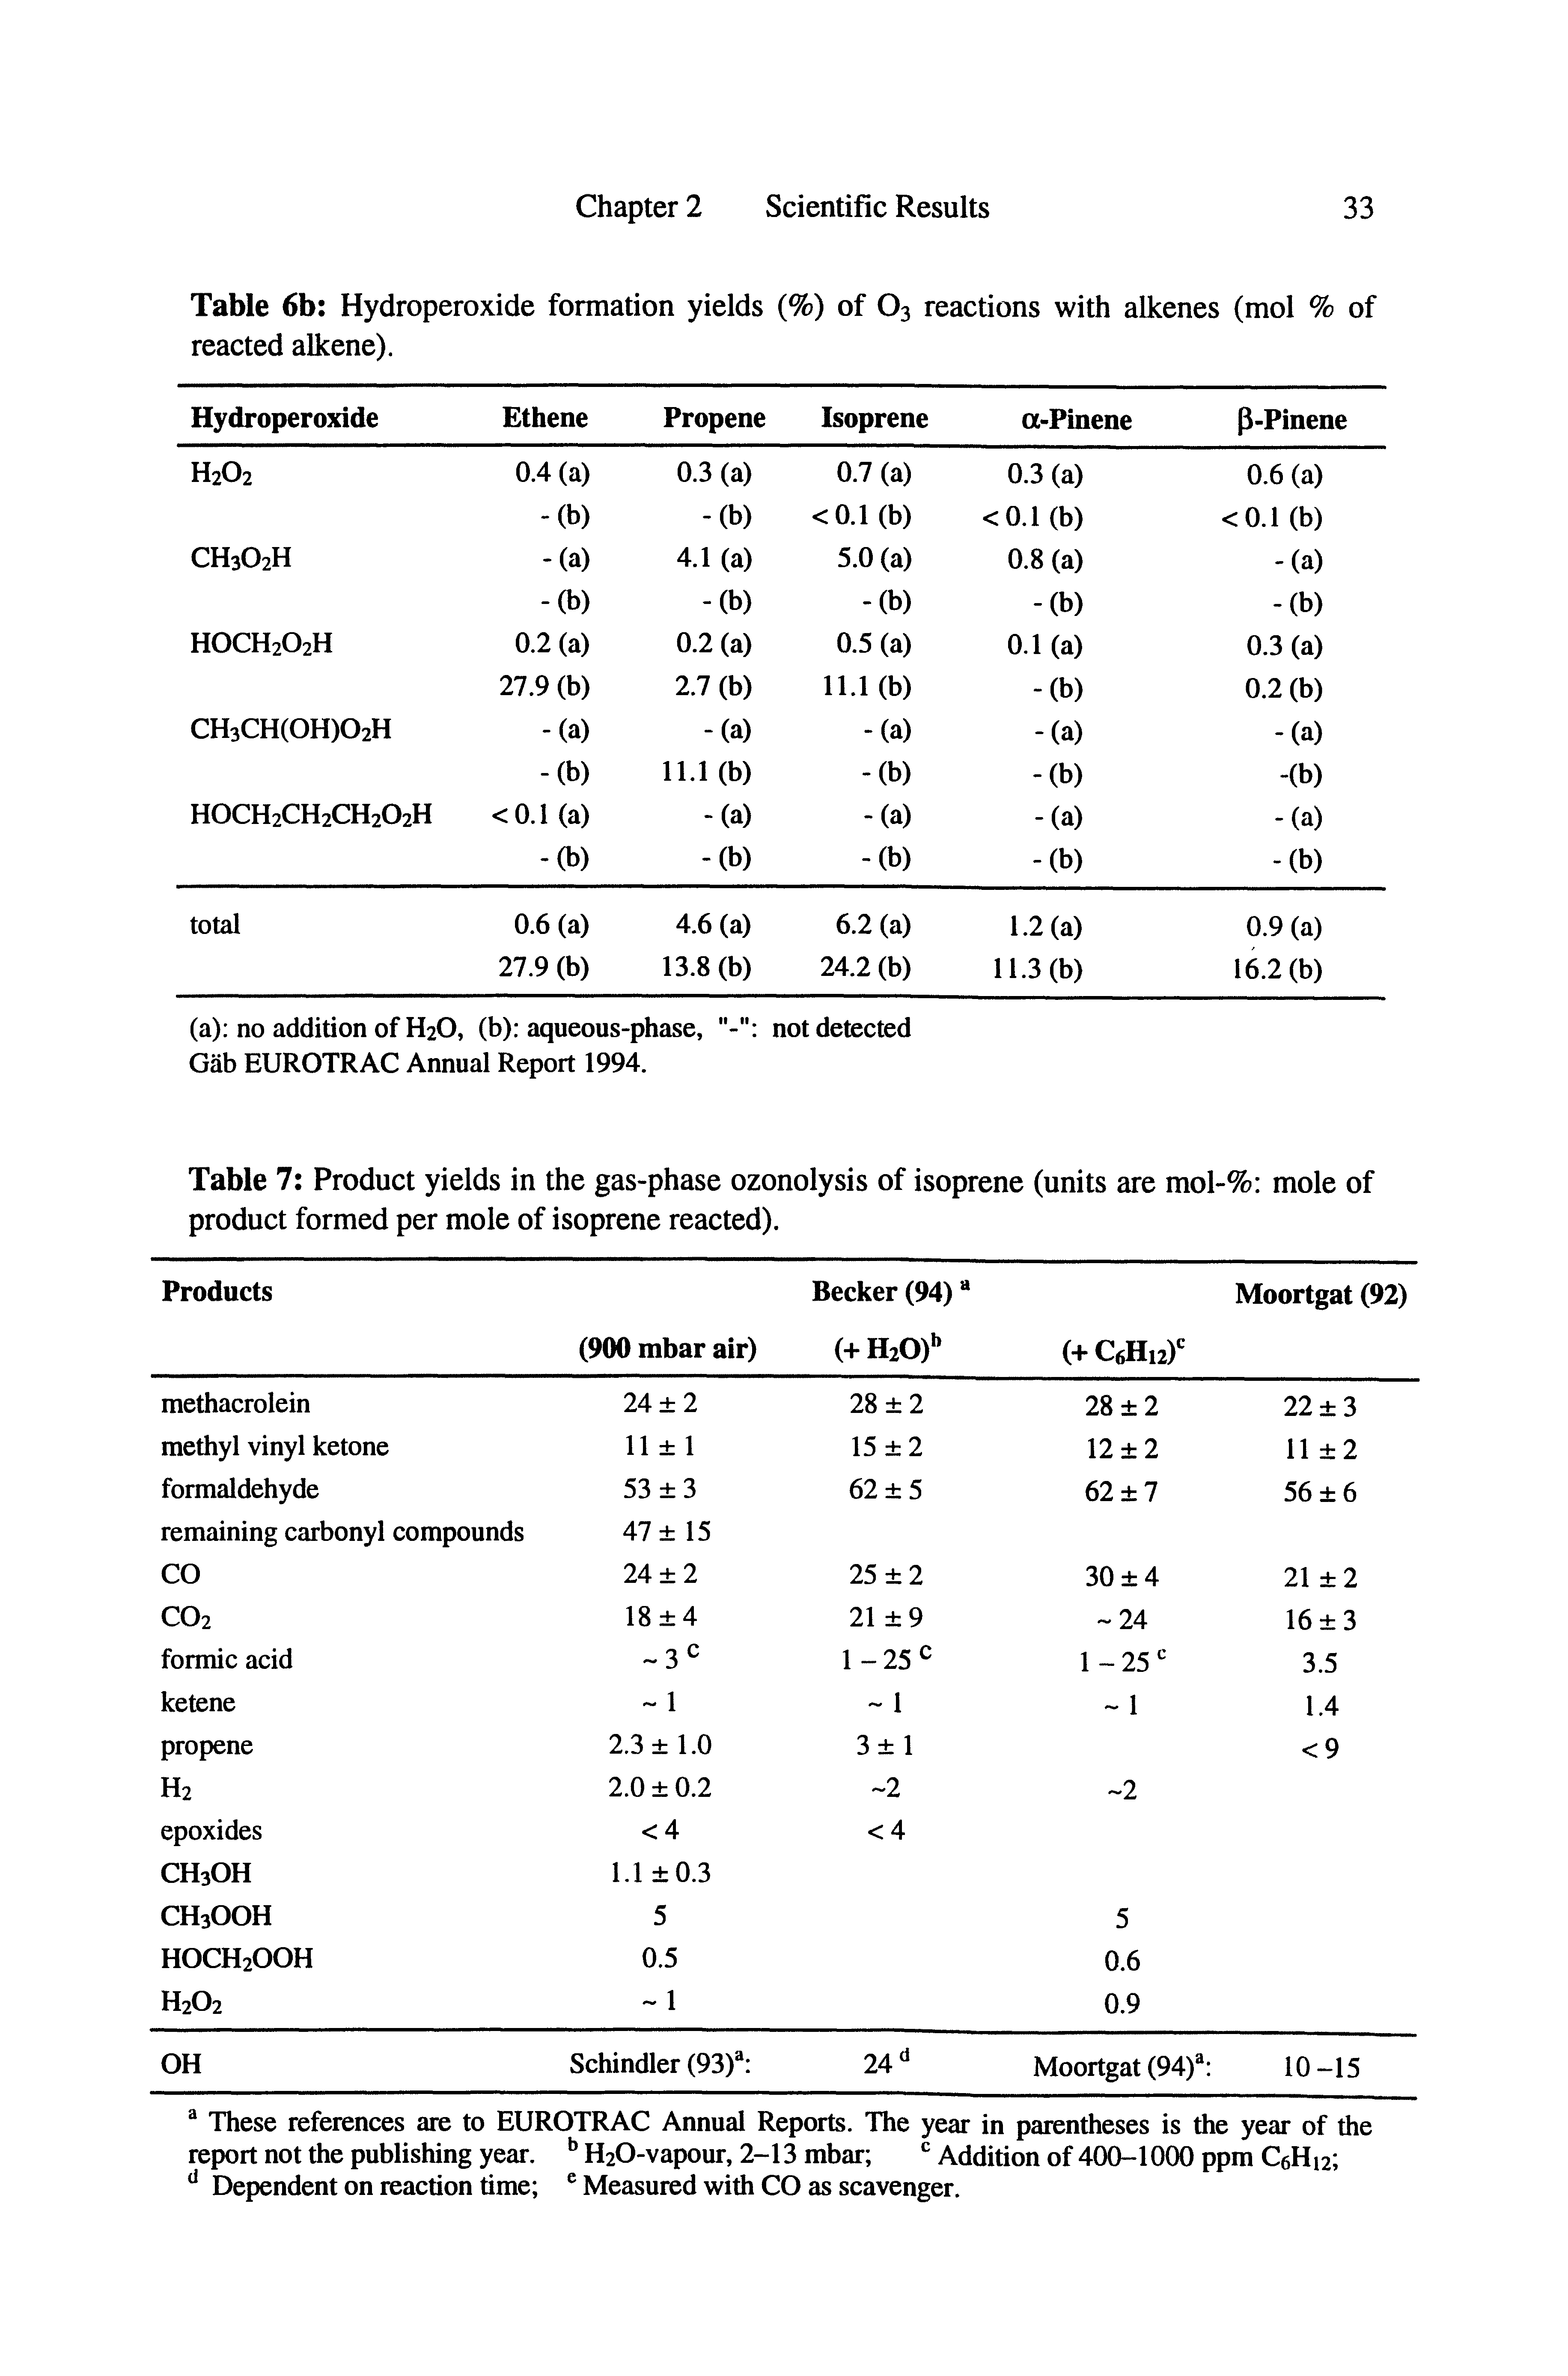 Table 7 Product yields in the gas-phase ozonolysis of isoprene (units are mol-% mole of product formed per mole of isoprene reacted).